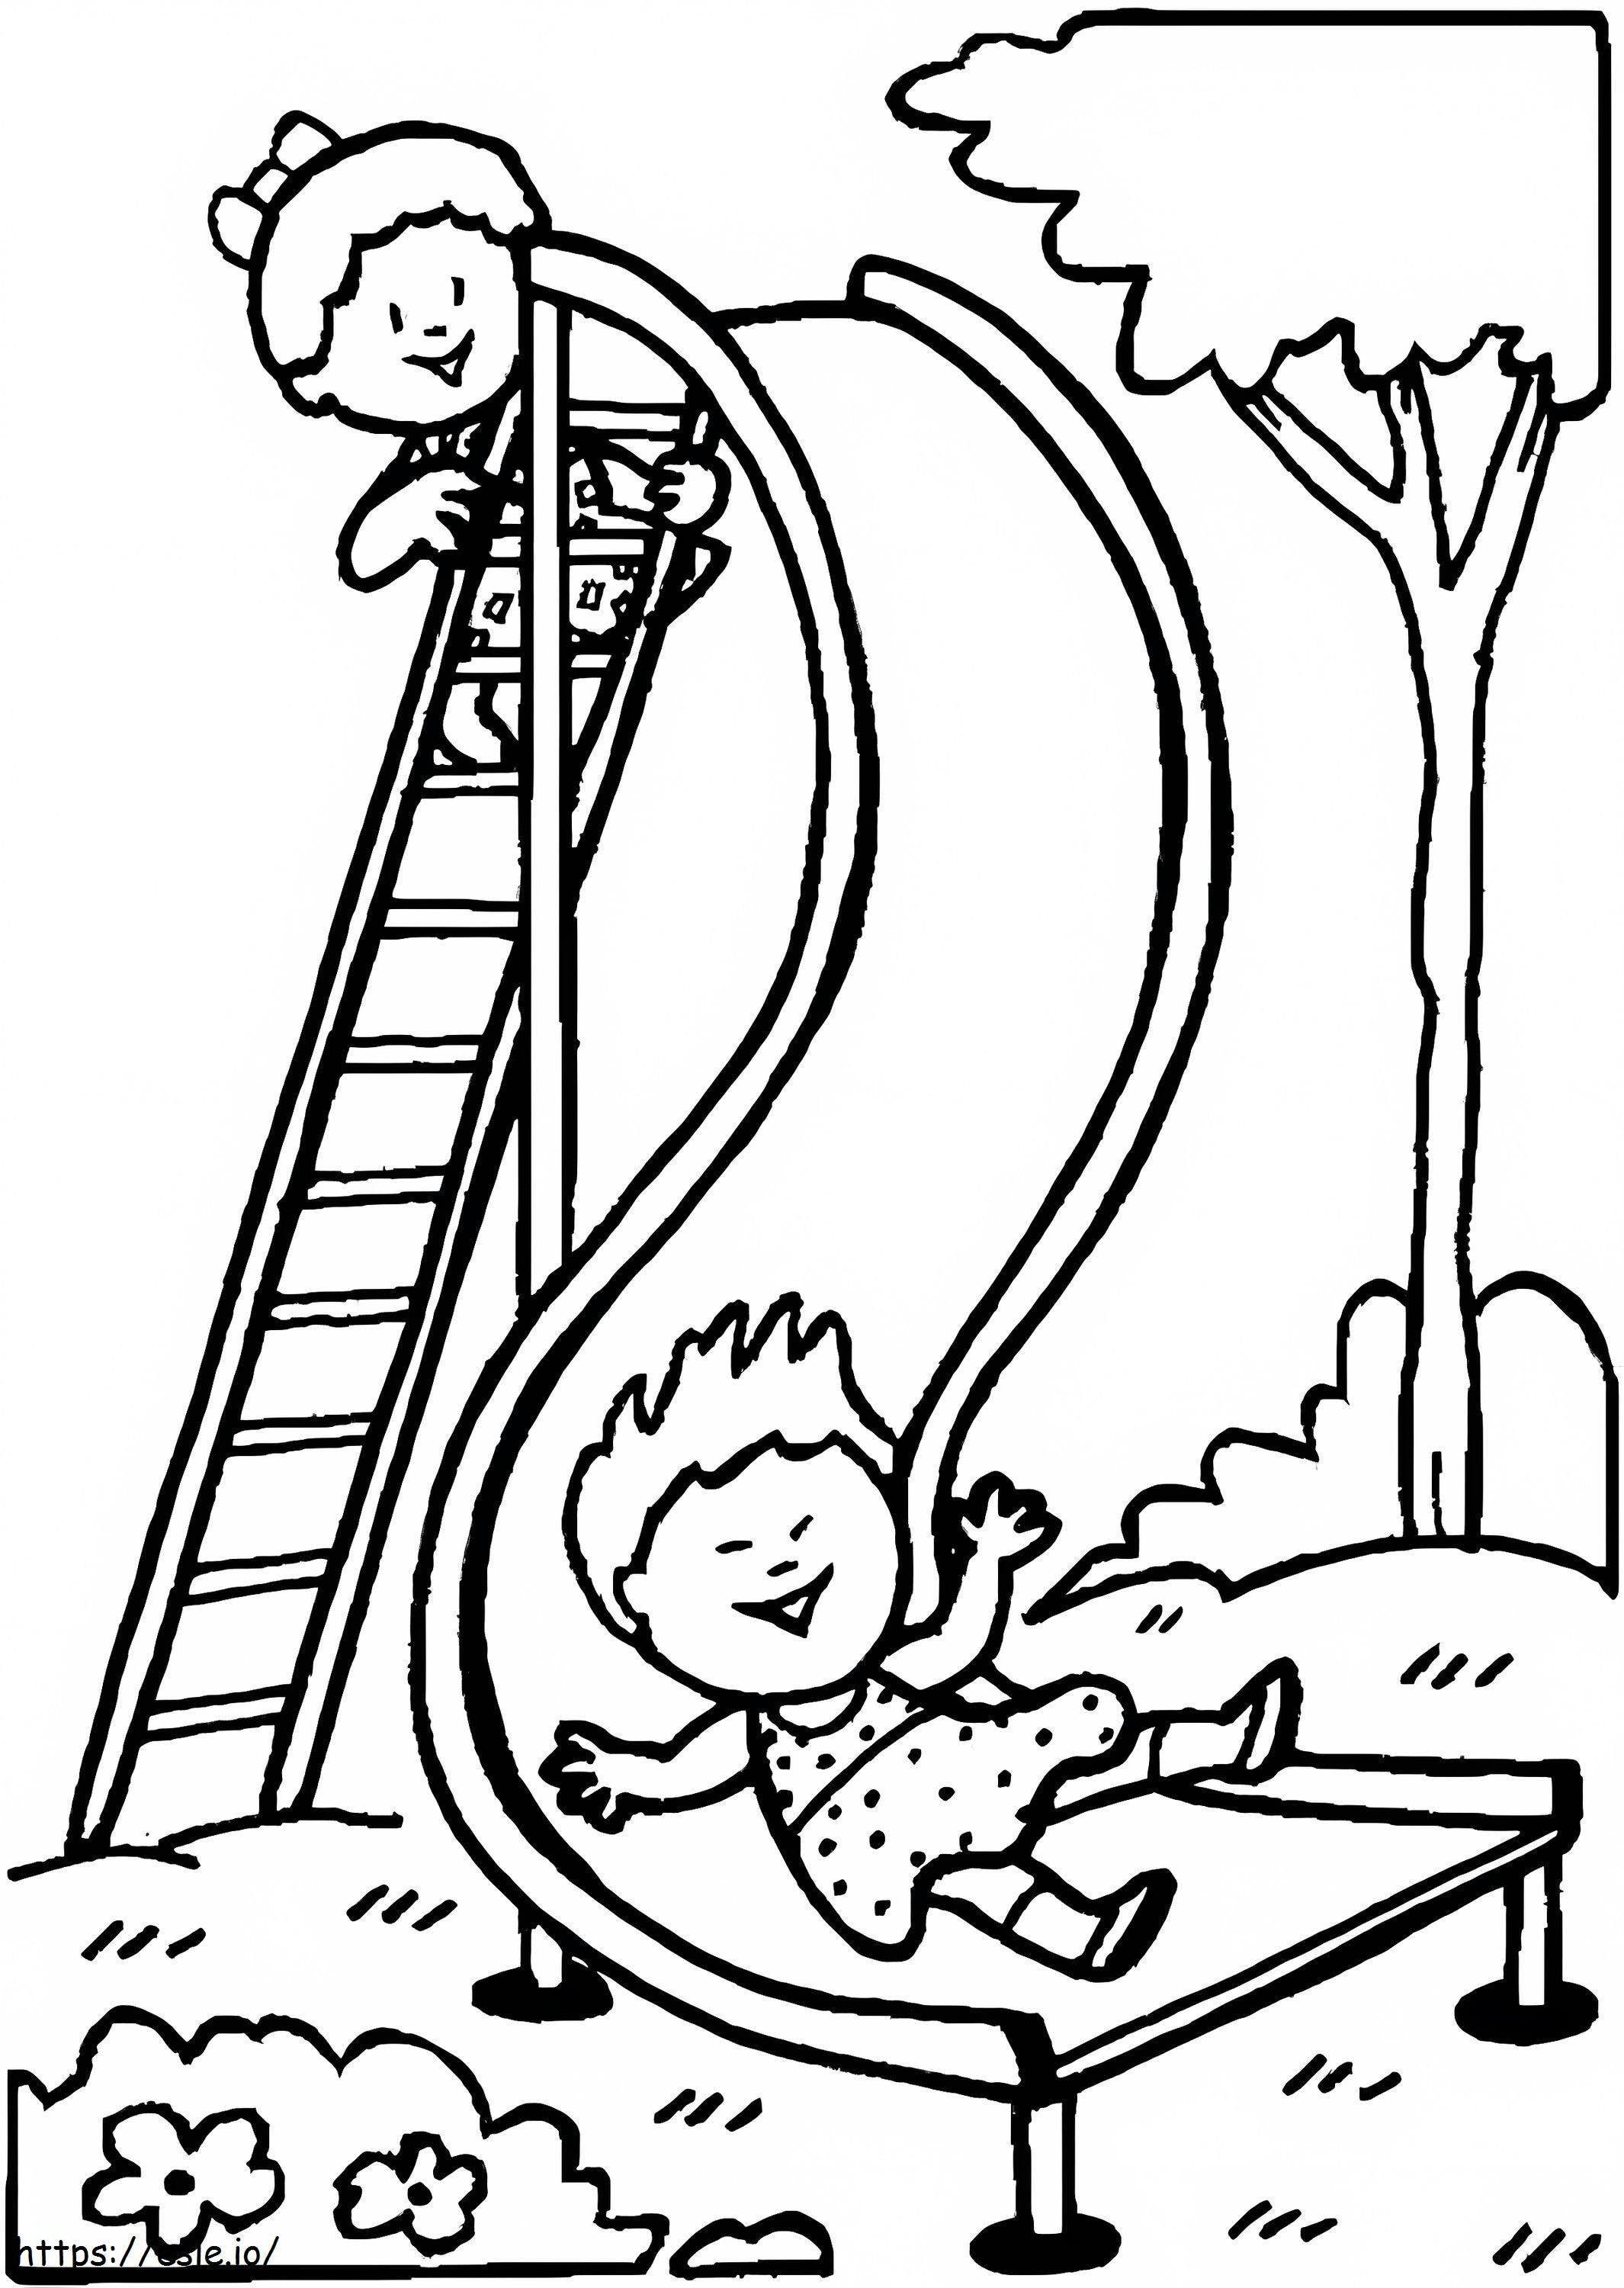 Slide In The Park coloring page